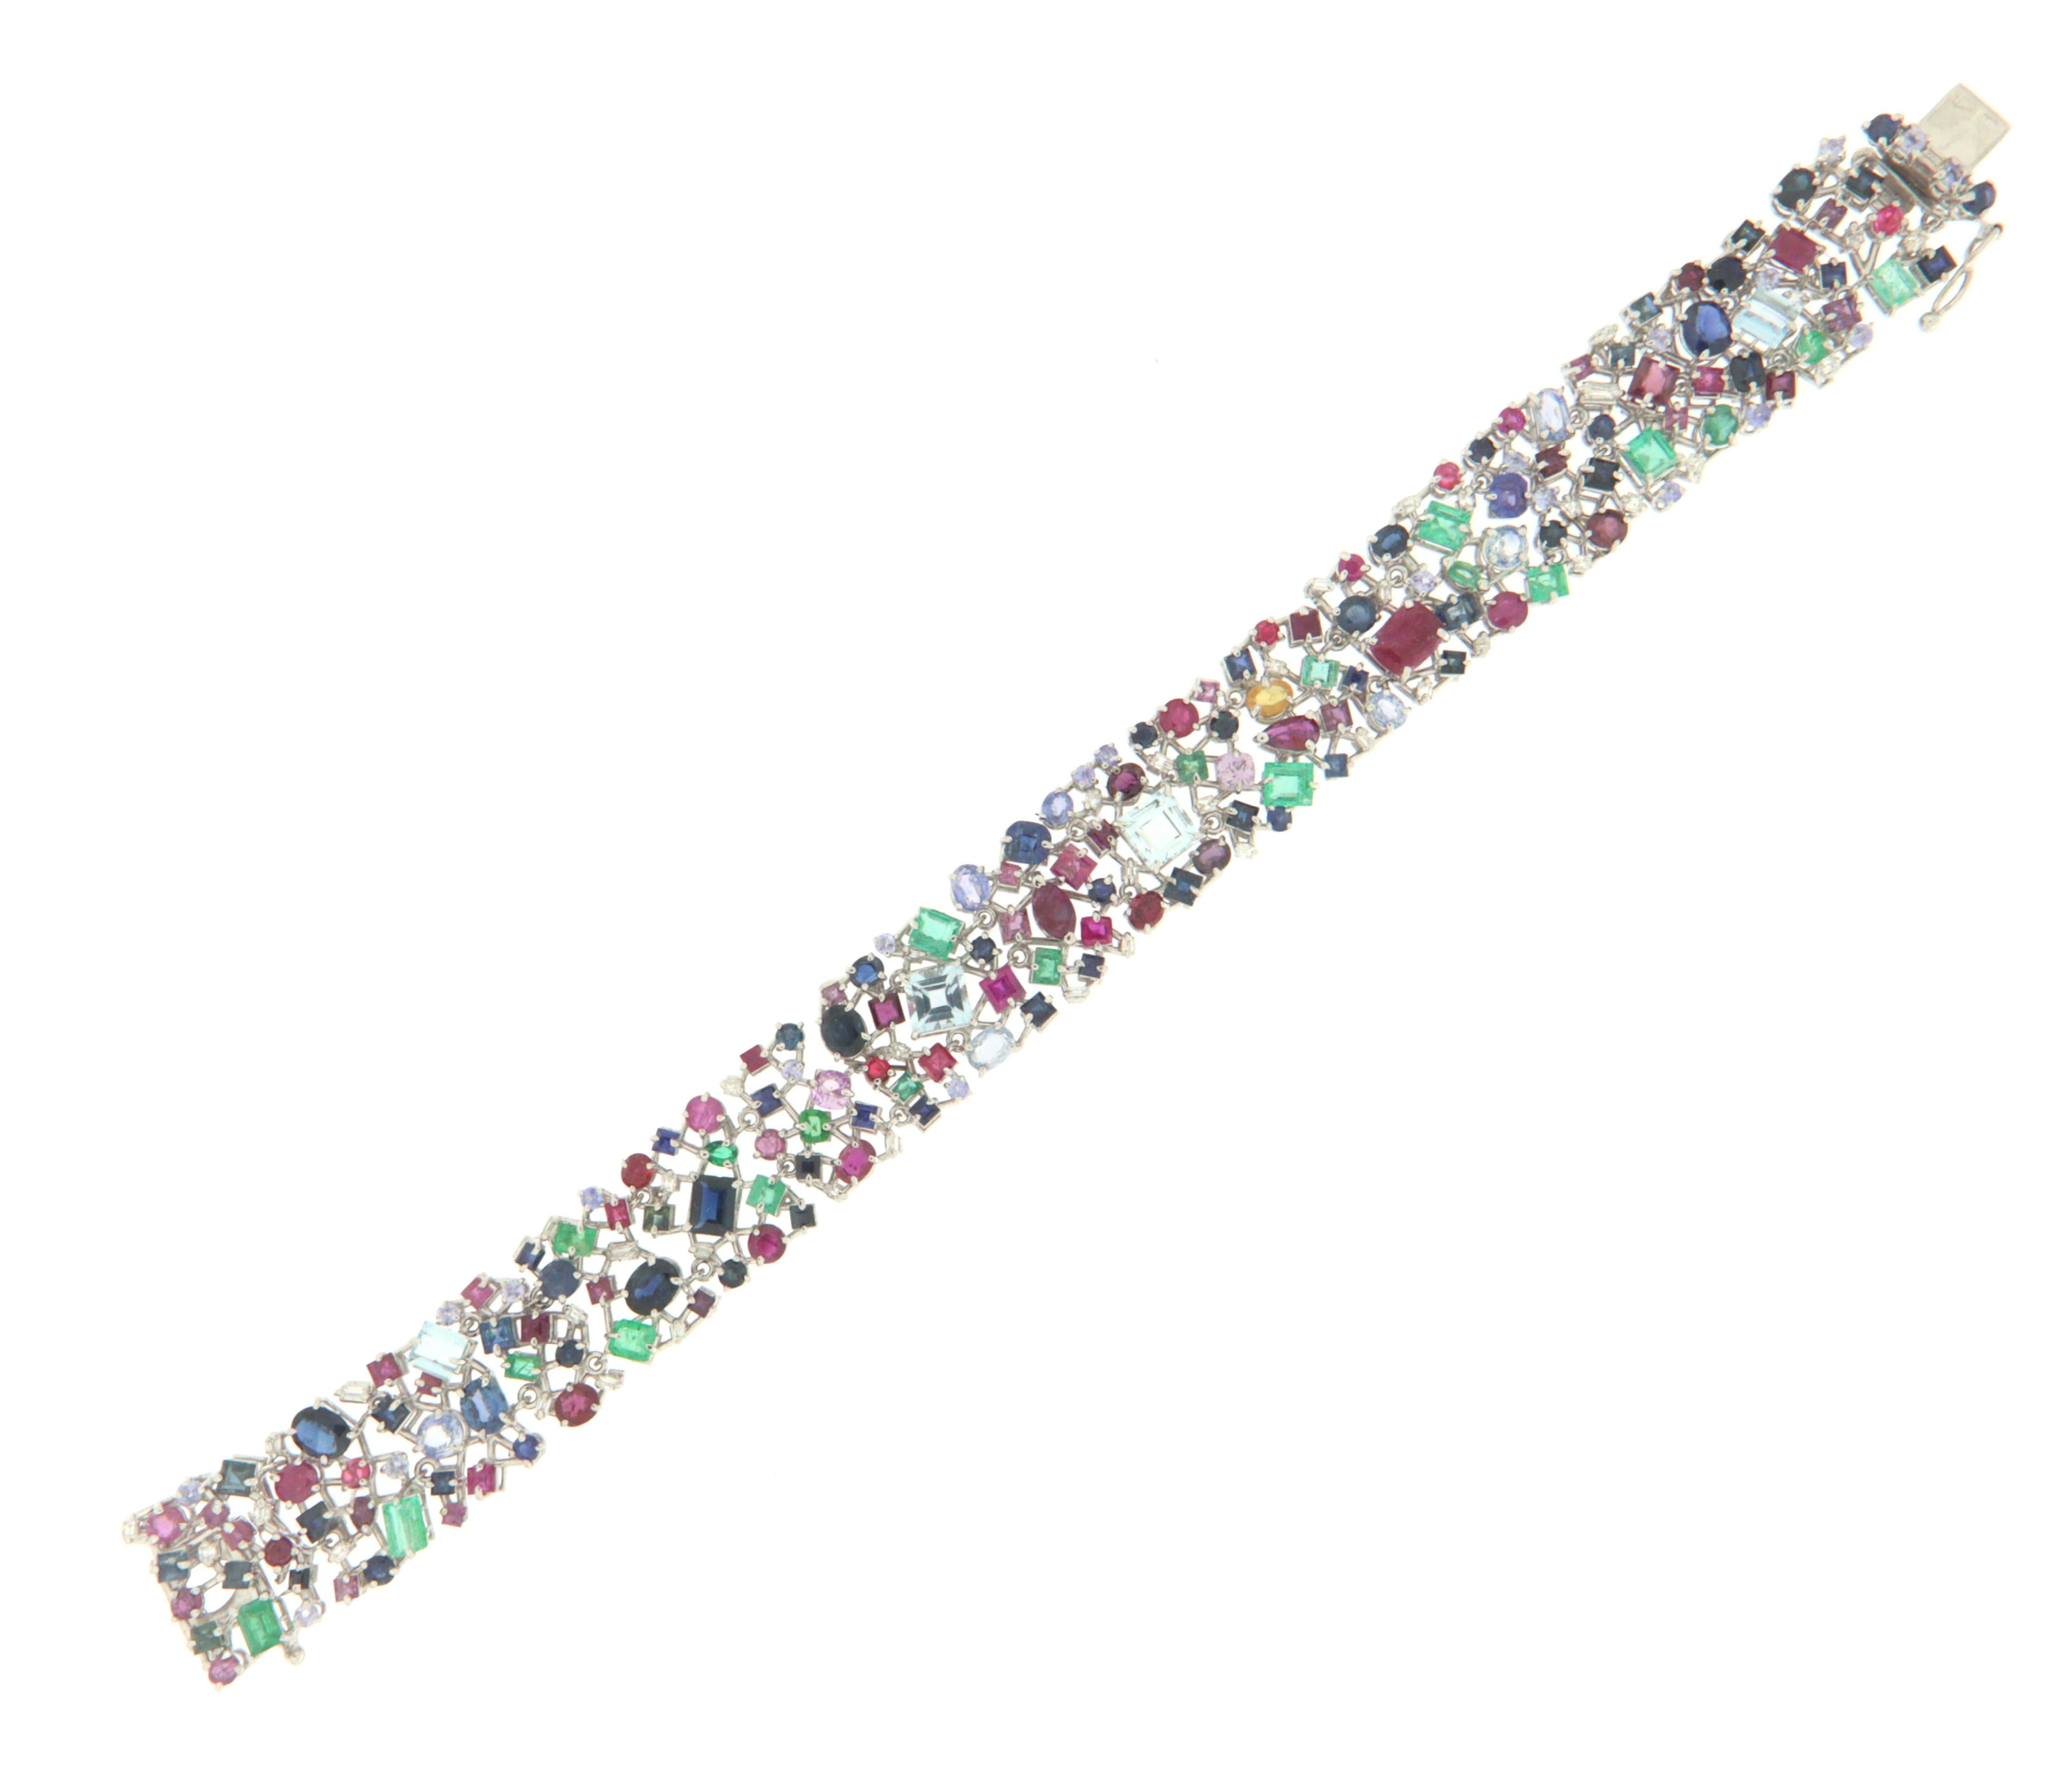 Amazing bracelet made entirely by hand mounted in 18 carat white gold that presents a real storm of colors with all kinds of natural stones, diamonds, rubies, sapphires, emeralds in any type of shape. A jewel to wear on the most important occasions